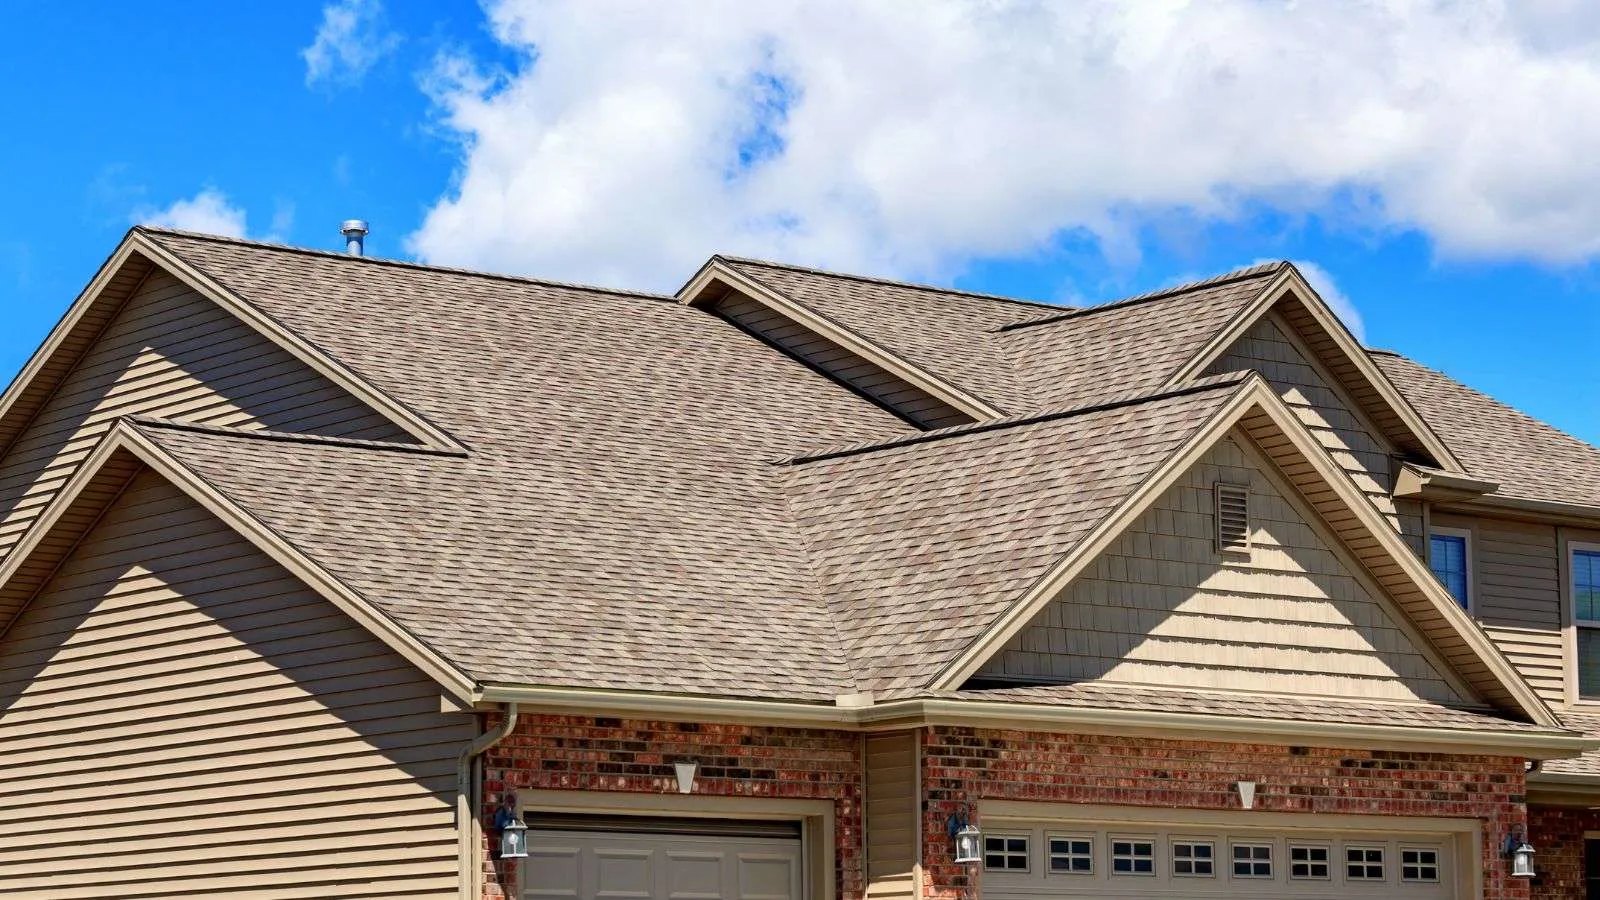 eco friendly roofing shingles on the market - bighomeprojects.com